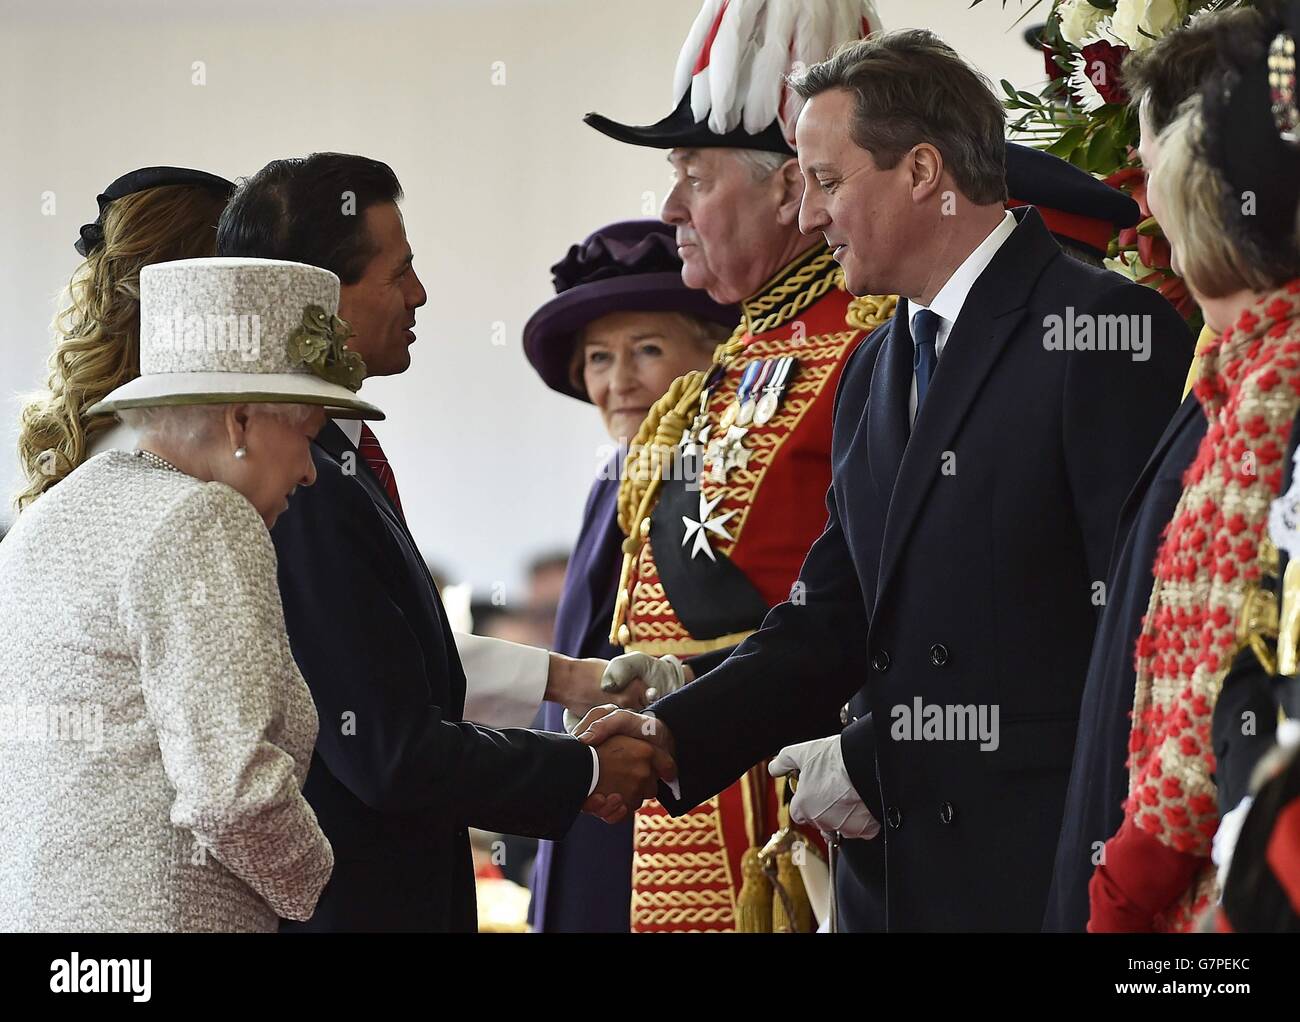 The President of Mexico Enrique Pena Nieto (second left) is greeted by Prime Minister David Cameron (right) during a ceremonial welcome at Horse Guards, on the first of a three-day state visit to Britain. Stock Photo